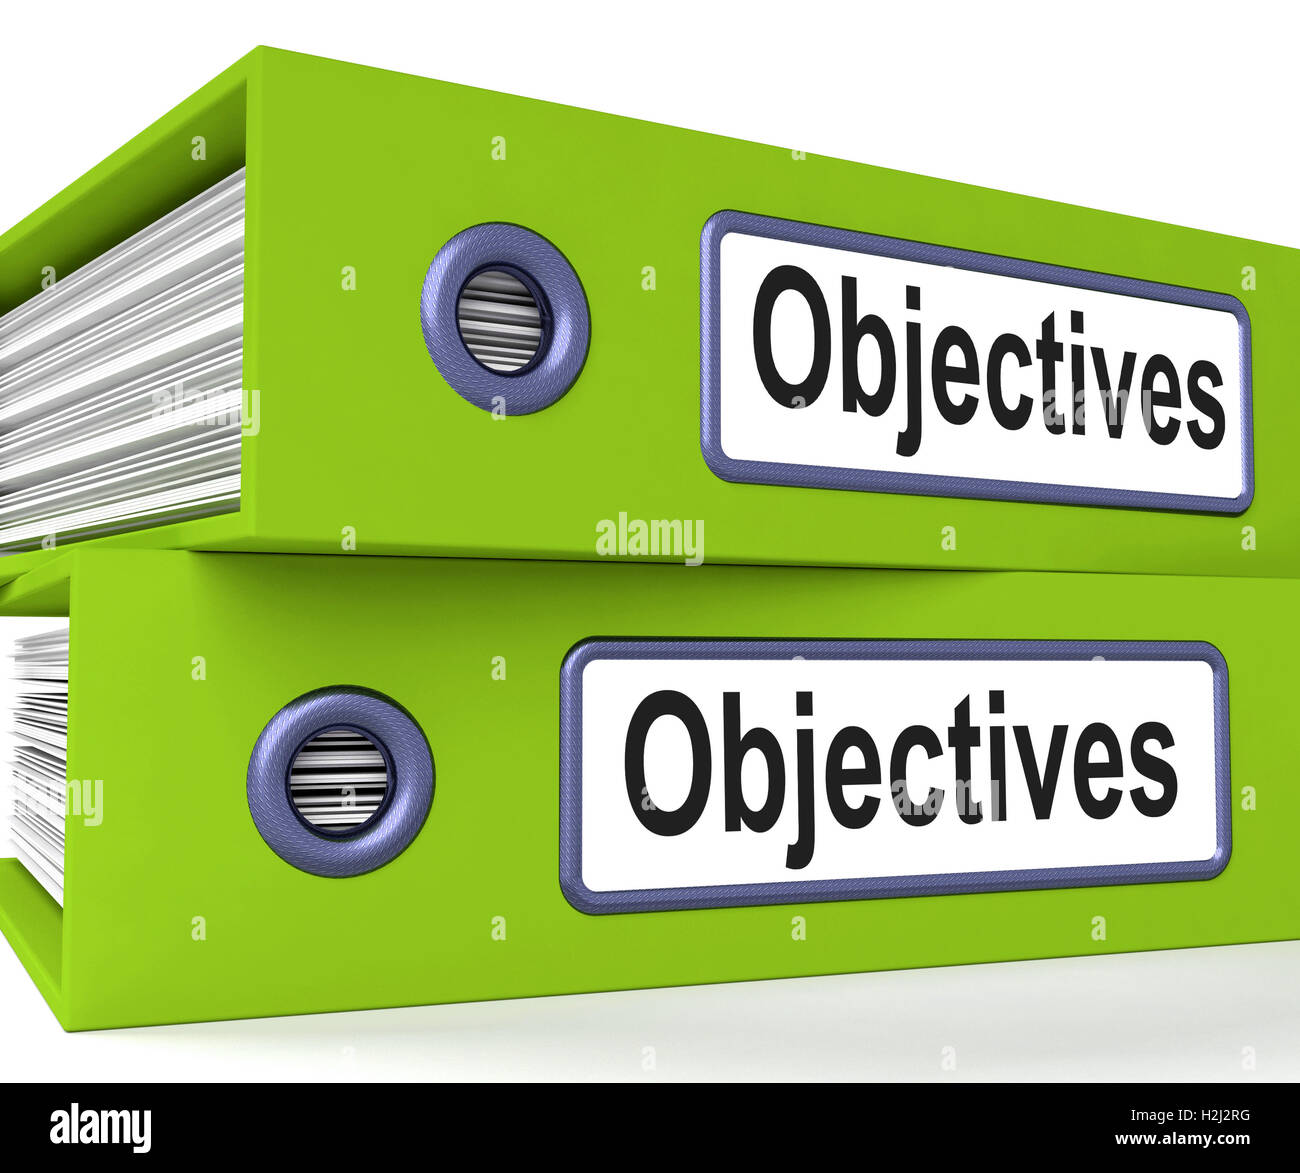 Objectives Folders Mean Business Goals And Targets Stock Photo